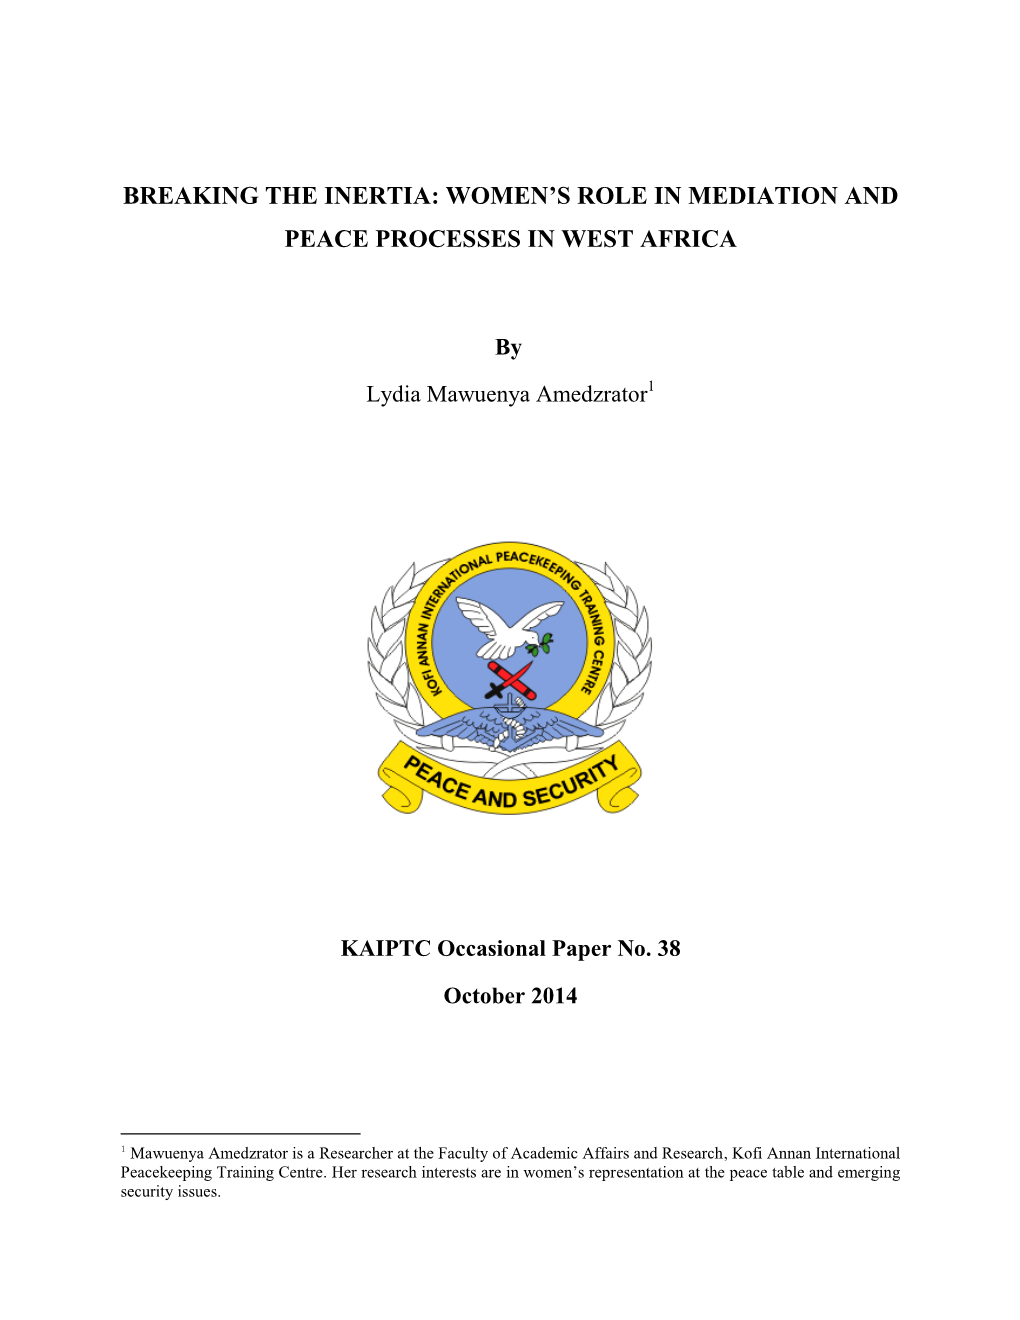 Women's Role in Mediation and Peace Processes in West Africa